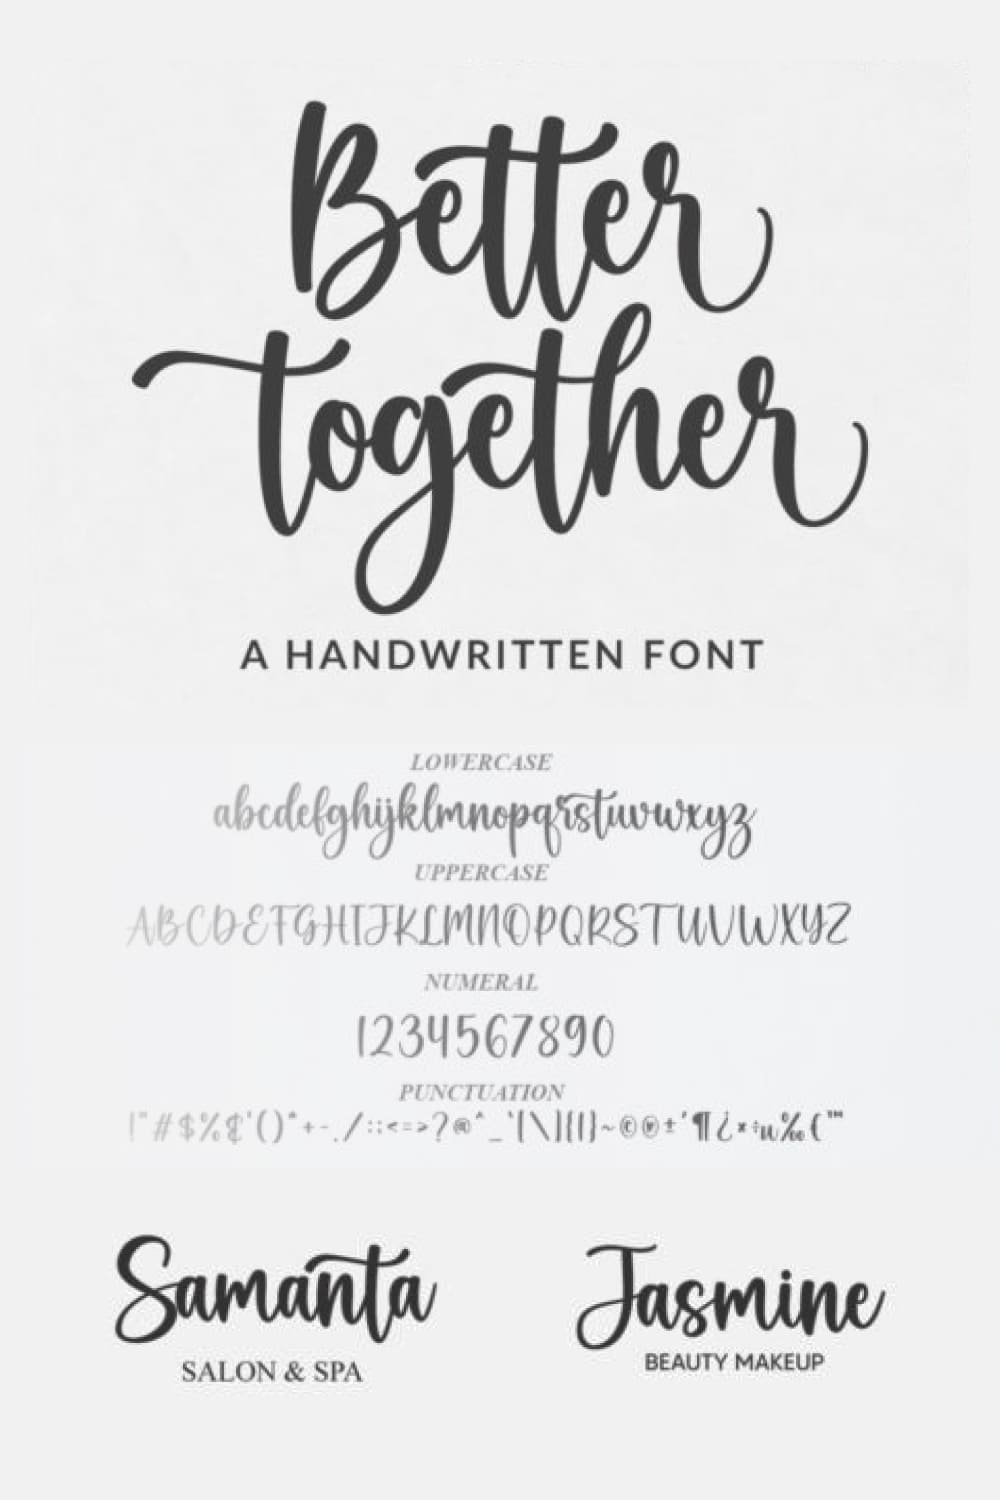 An example of a Better Together font on a gray background.